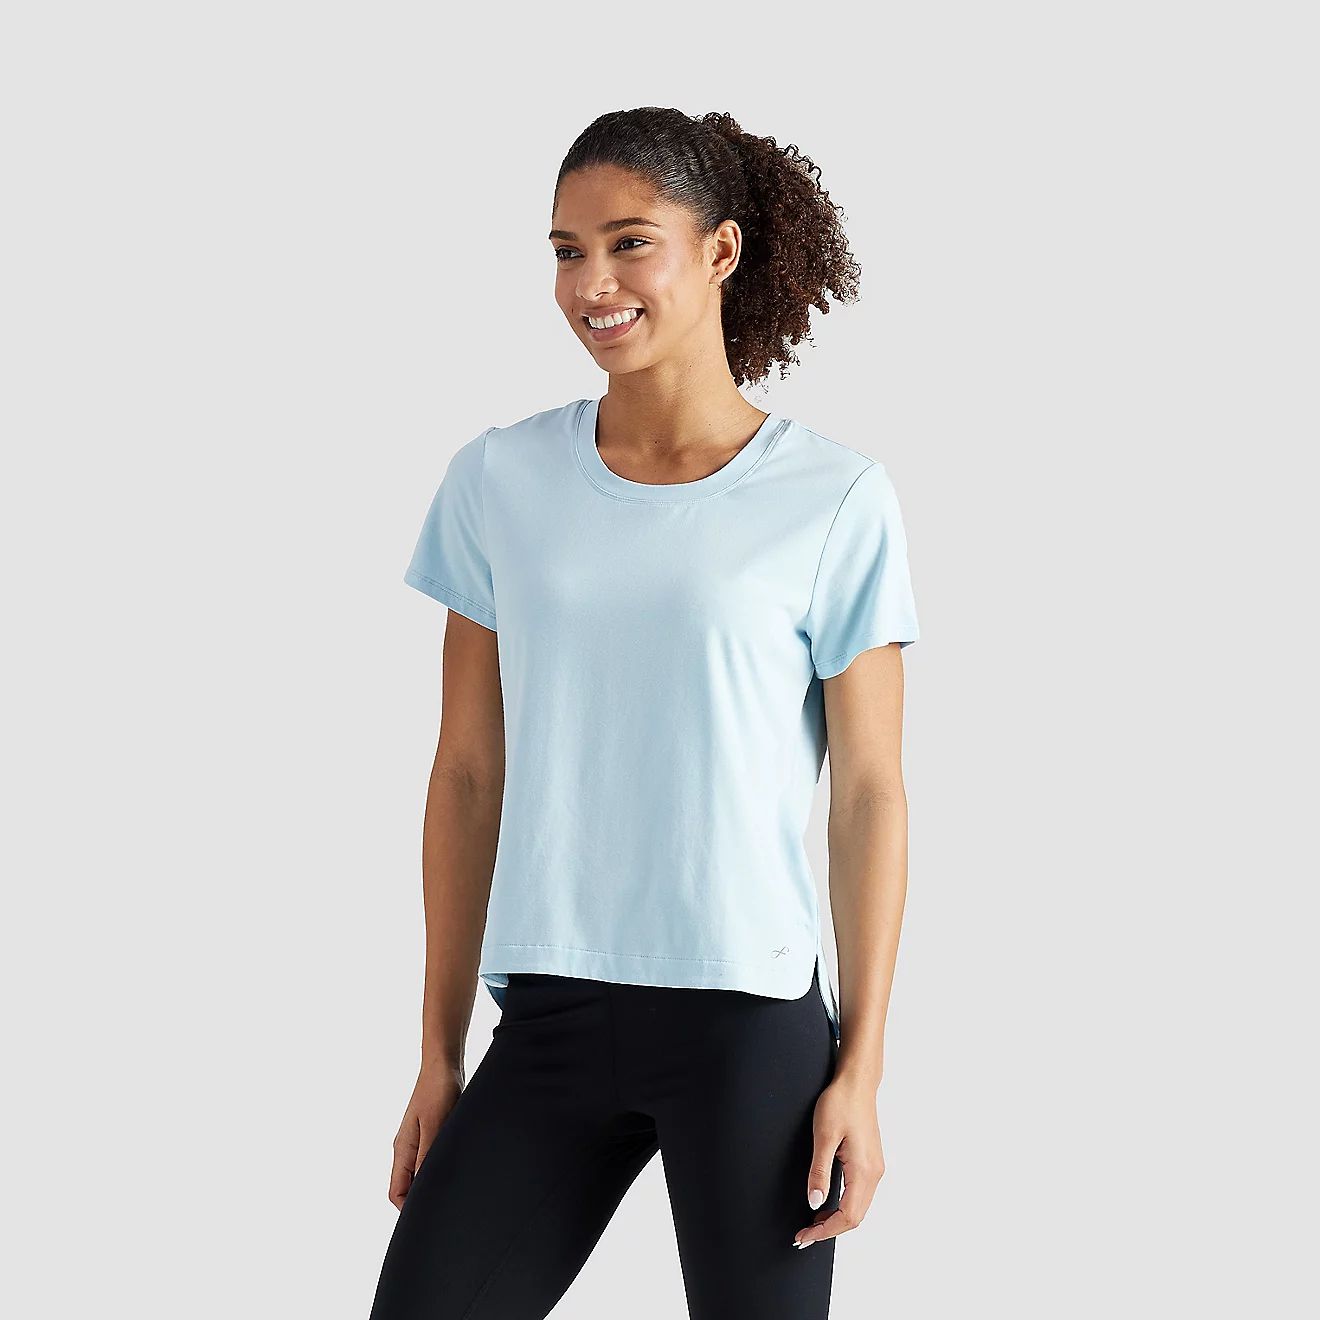 Freely Women's Analise Short Sleeve T-shirt | Academy | Academy Sports + Outdoors